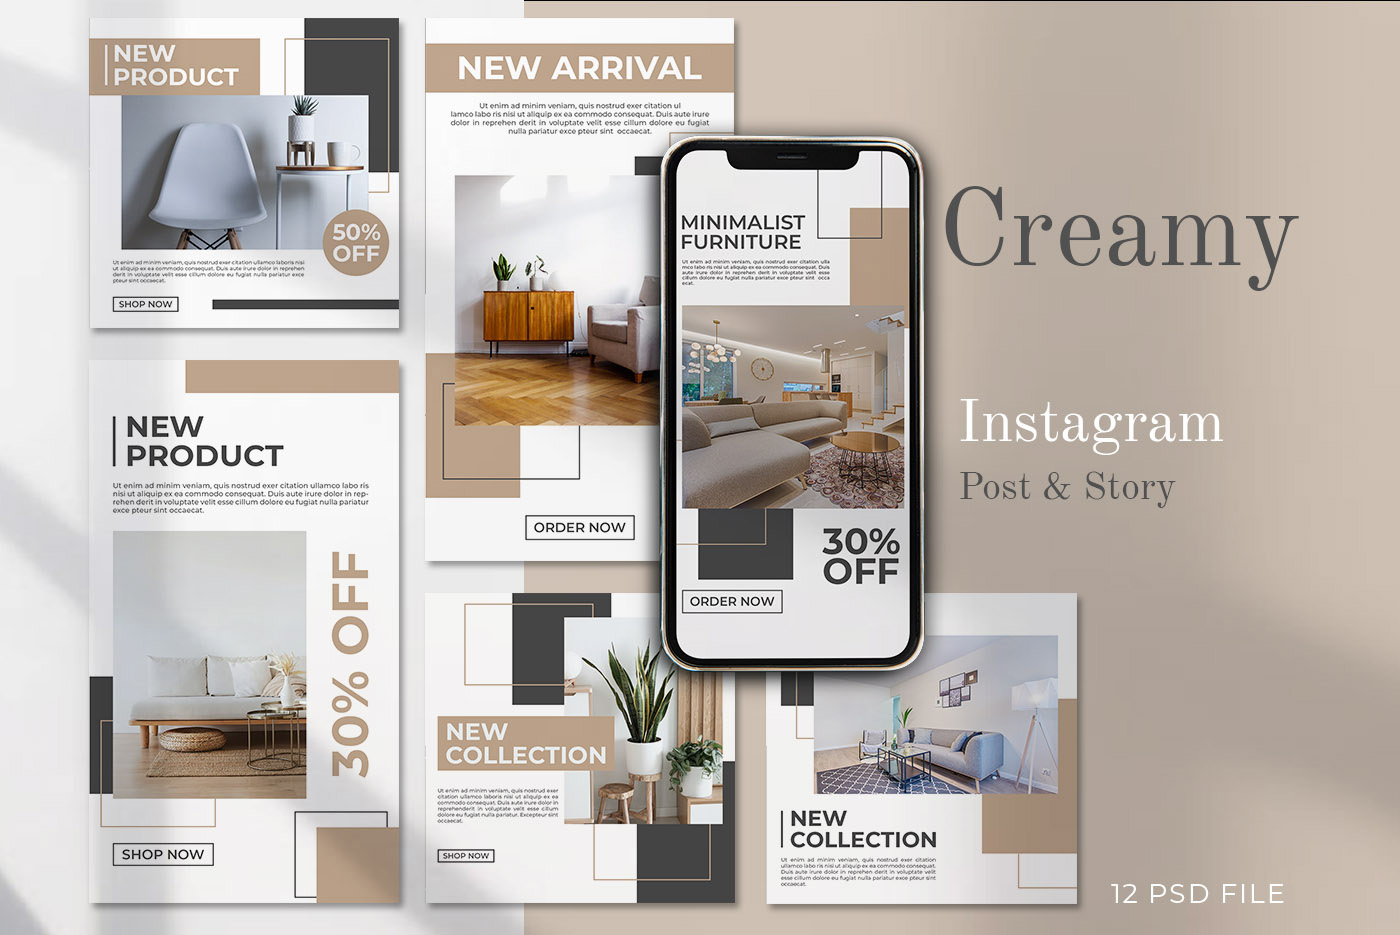 CREAMY - Social Media Post and Instagram Story Template